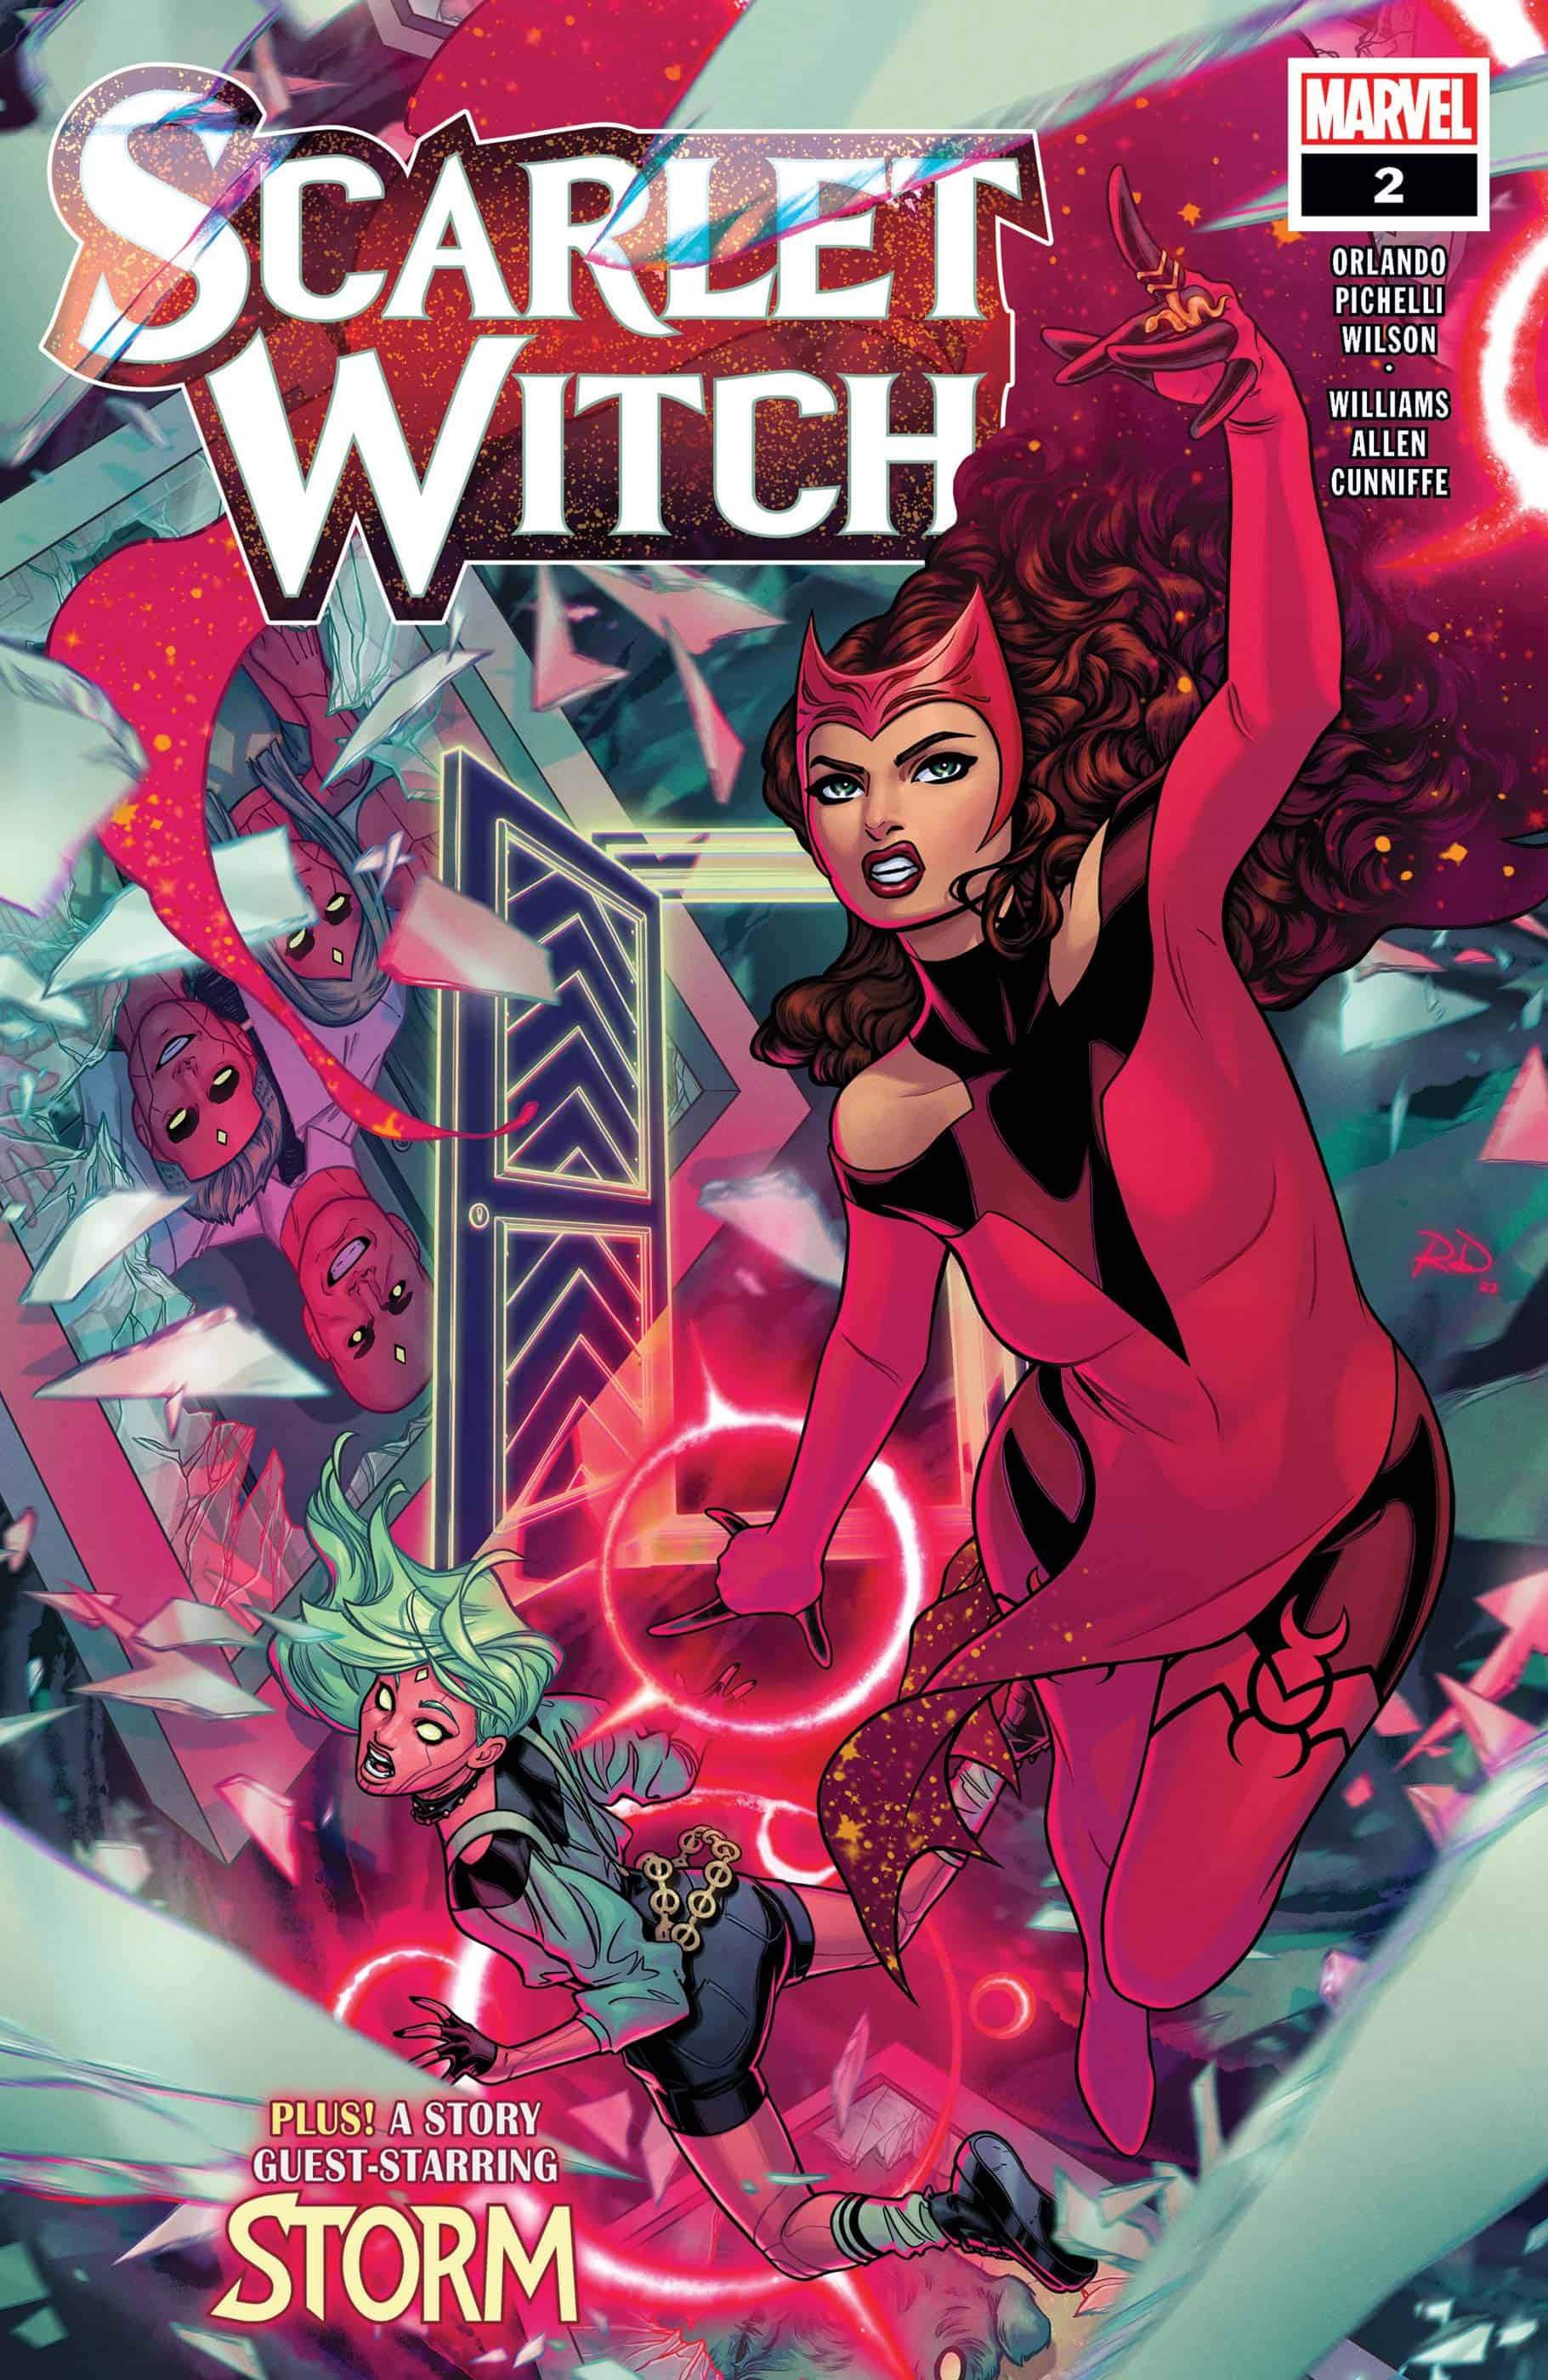 SCARLET WITCH - Unknown Comic Books